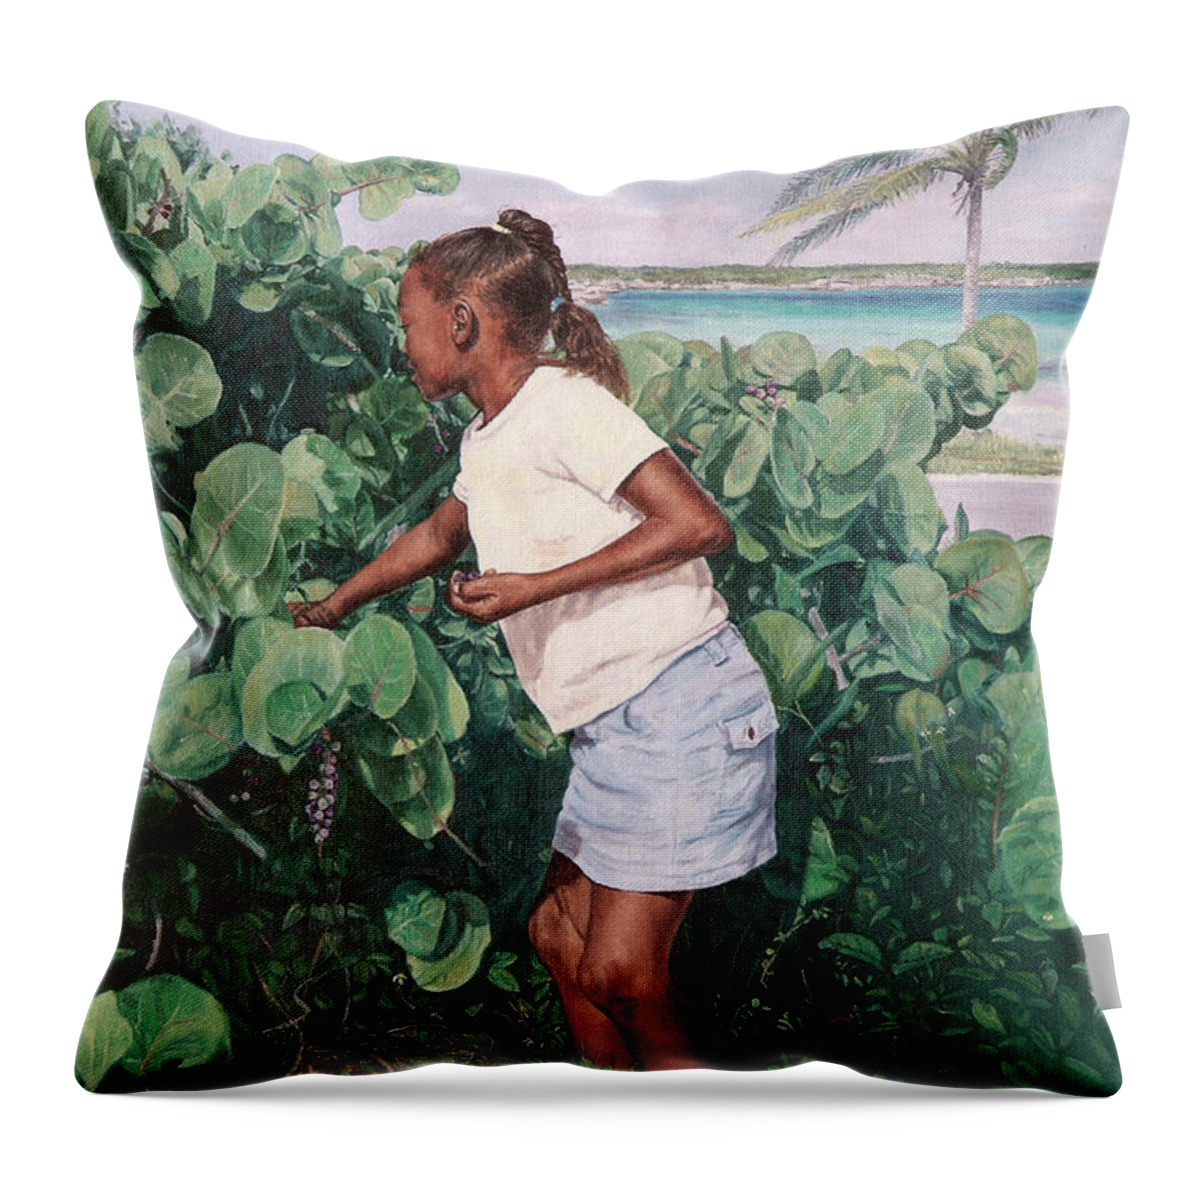 Roshanne Throw Pillow featuring the painting Treasure Cove by Roshanne Minnis-Eyma